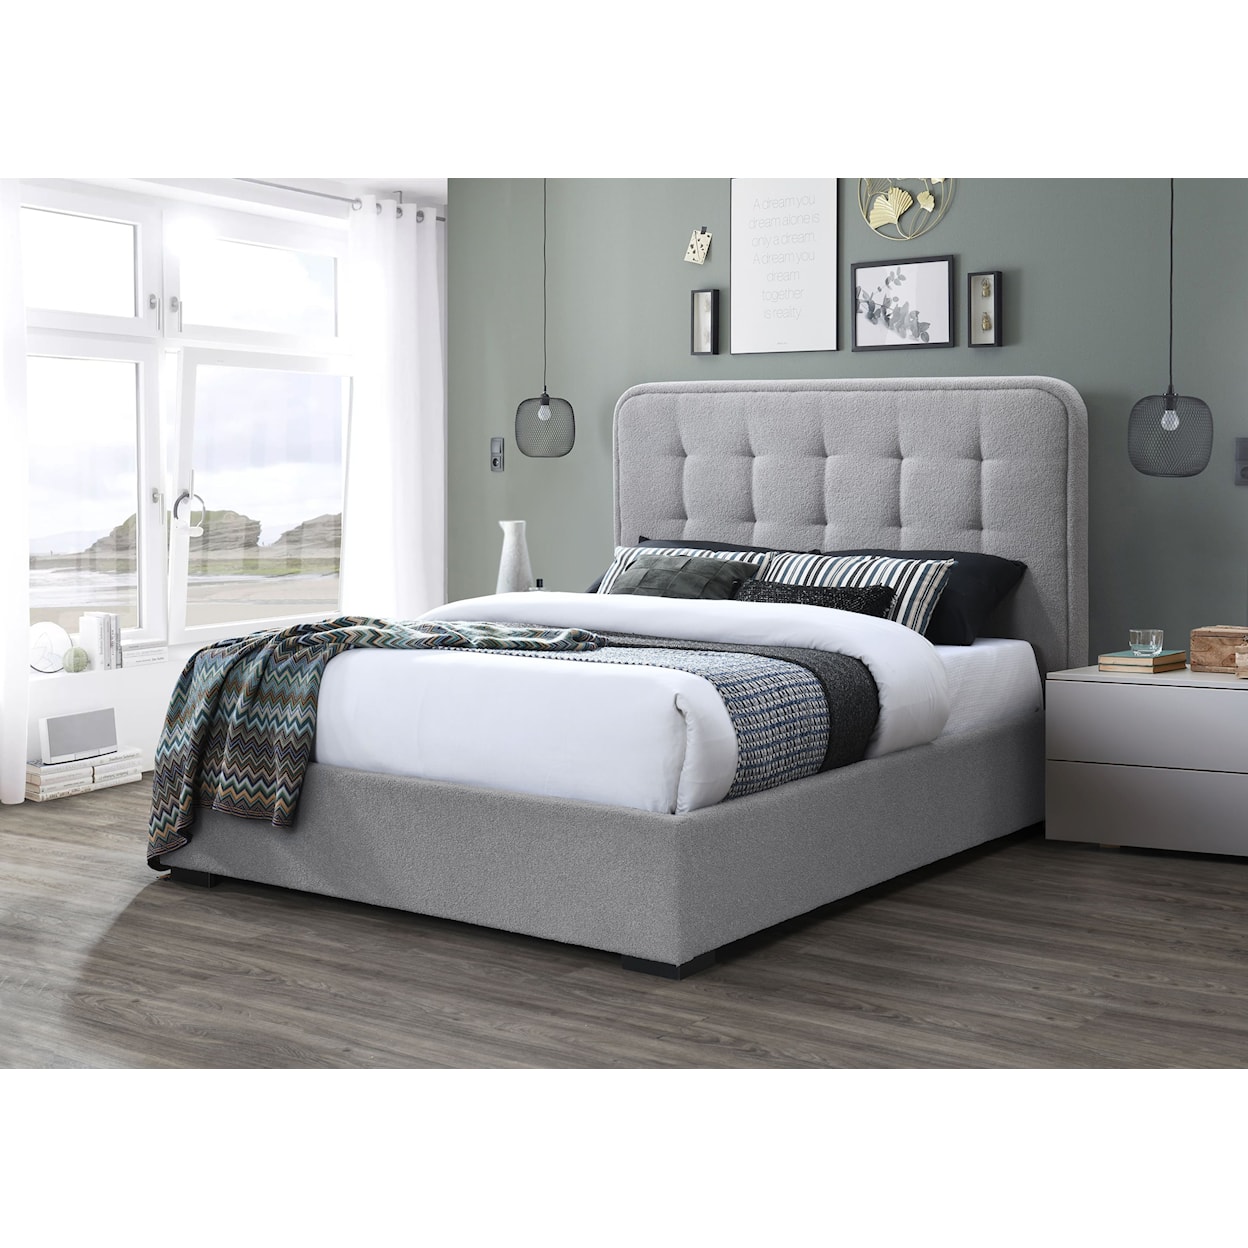 Lifestyle 9434A Upholstered Bed - Full